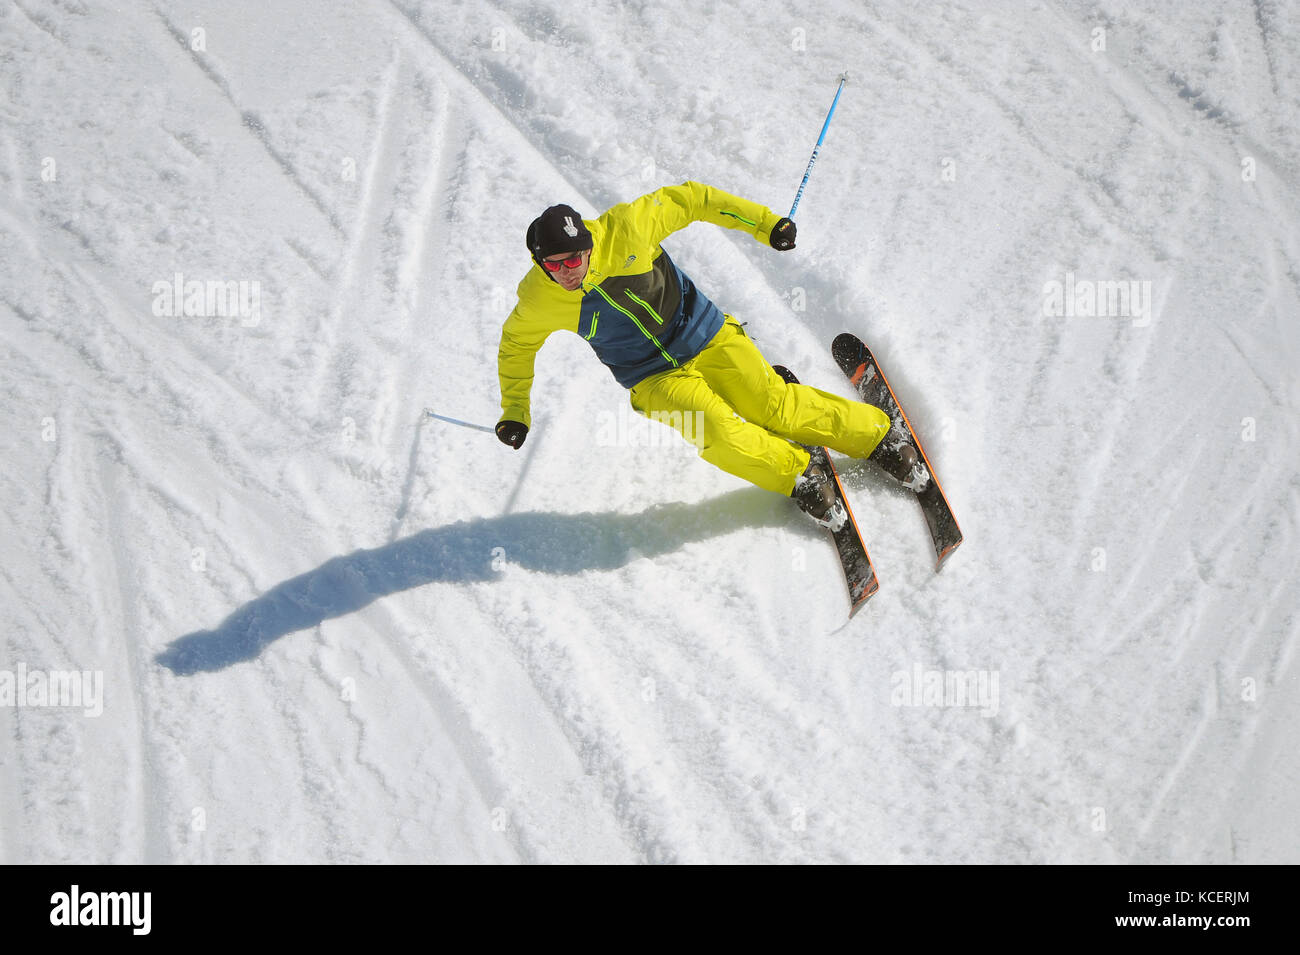 A skier carves a turn photographed from above. Stock Photo